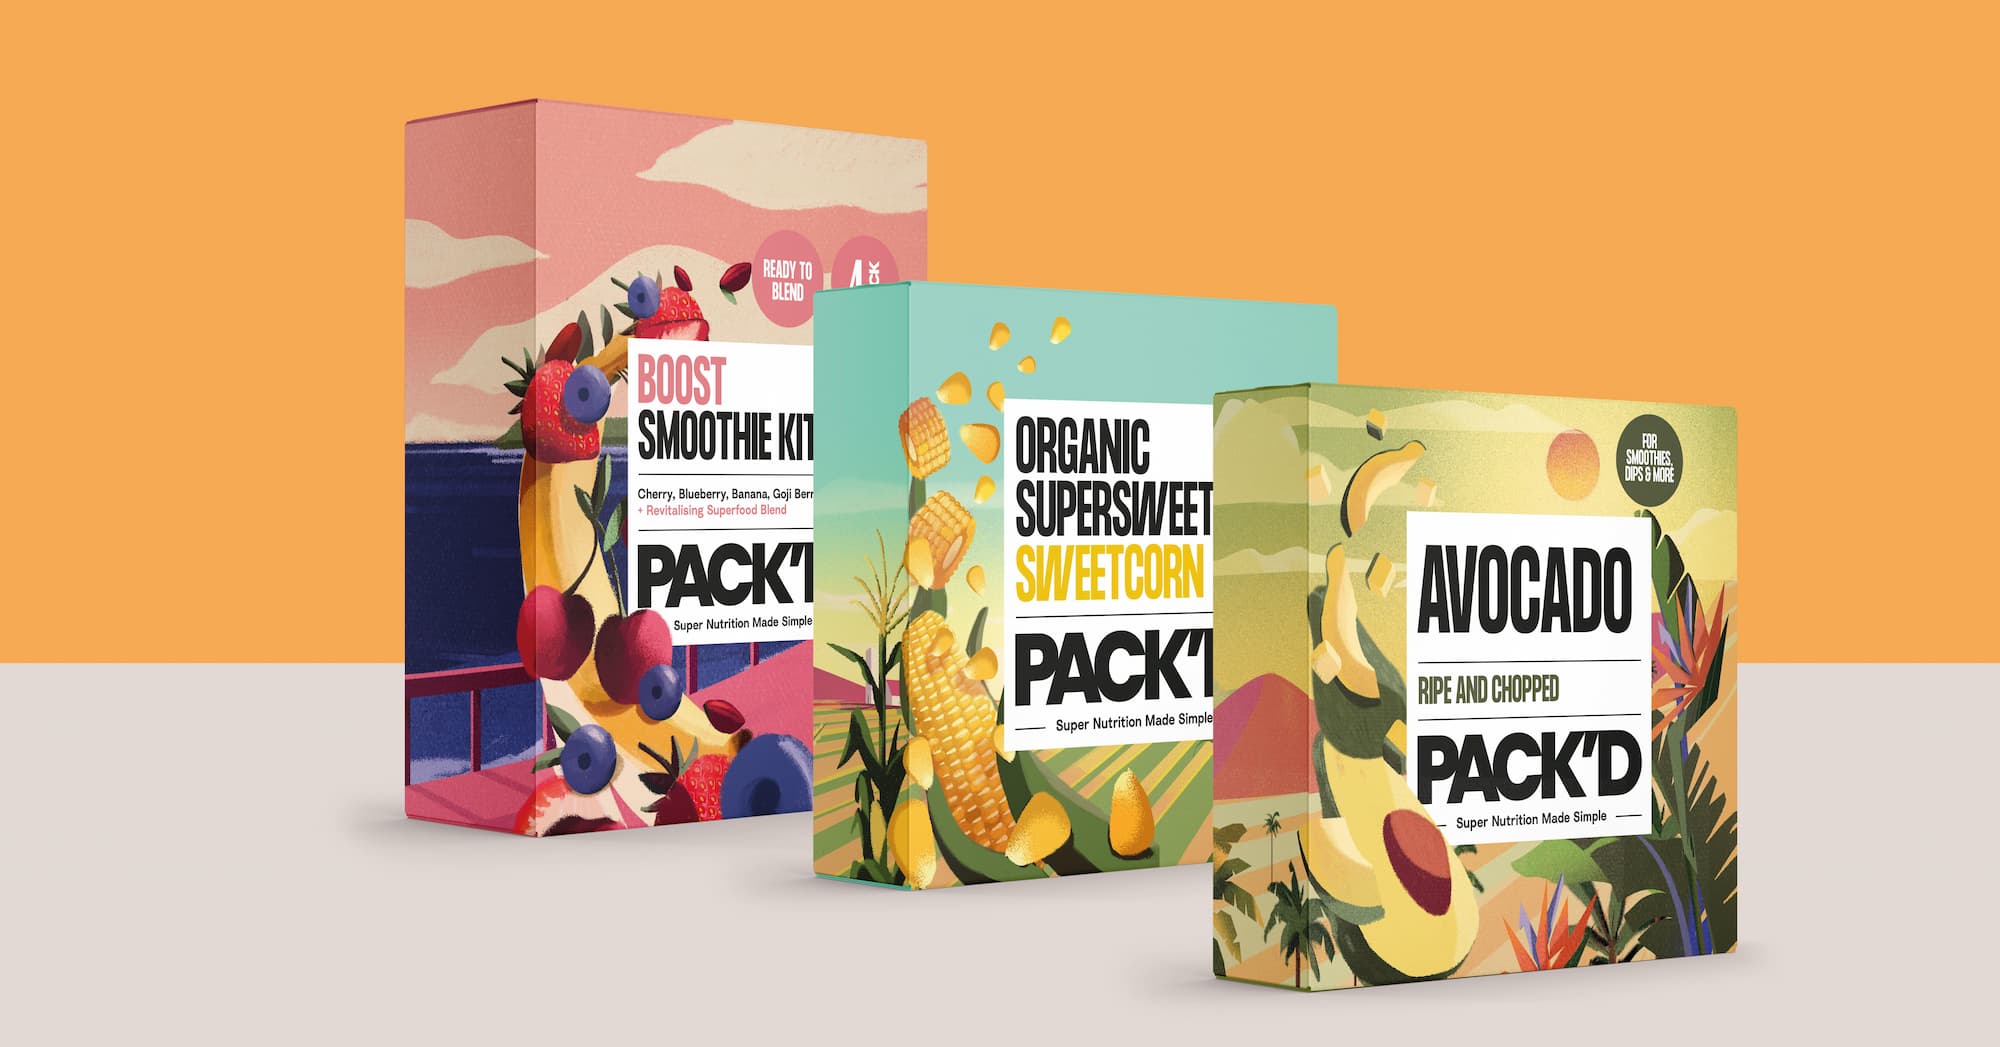 REVIVE SUPERFOODS Plant Based Frozen Fruit Smoothie Kit - 12 Pack  Strawberry Smoothies Variety Pack with Strawberry, Banana, Goji Berry,  Dragon Fruit